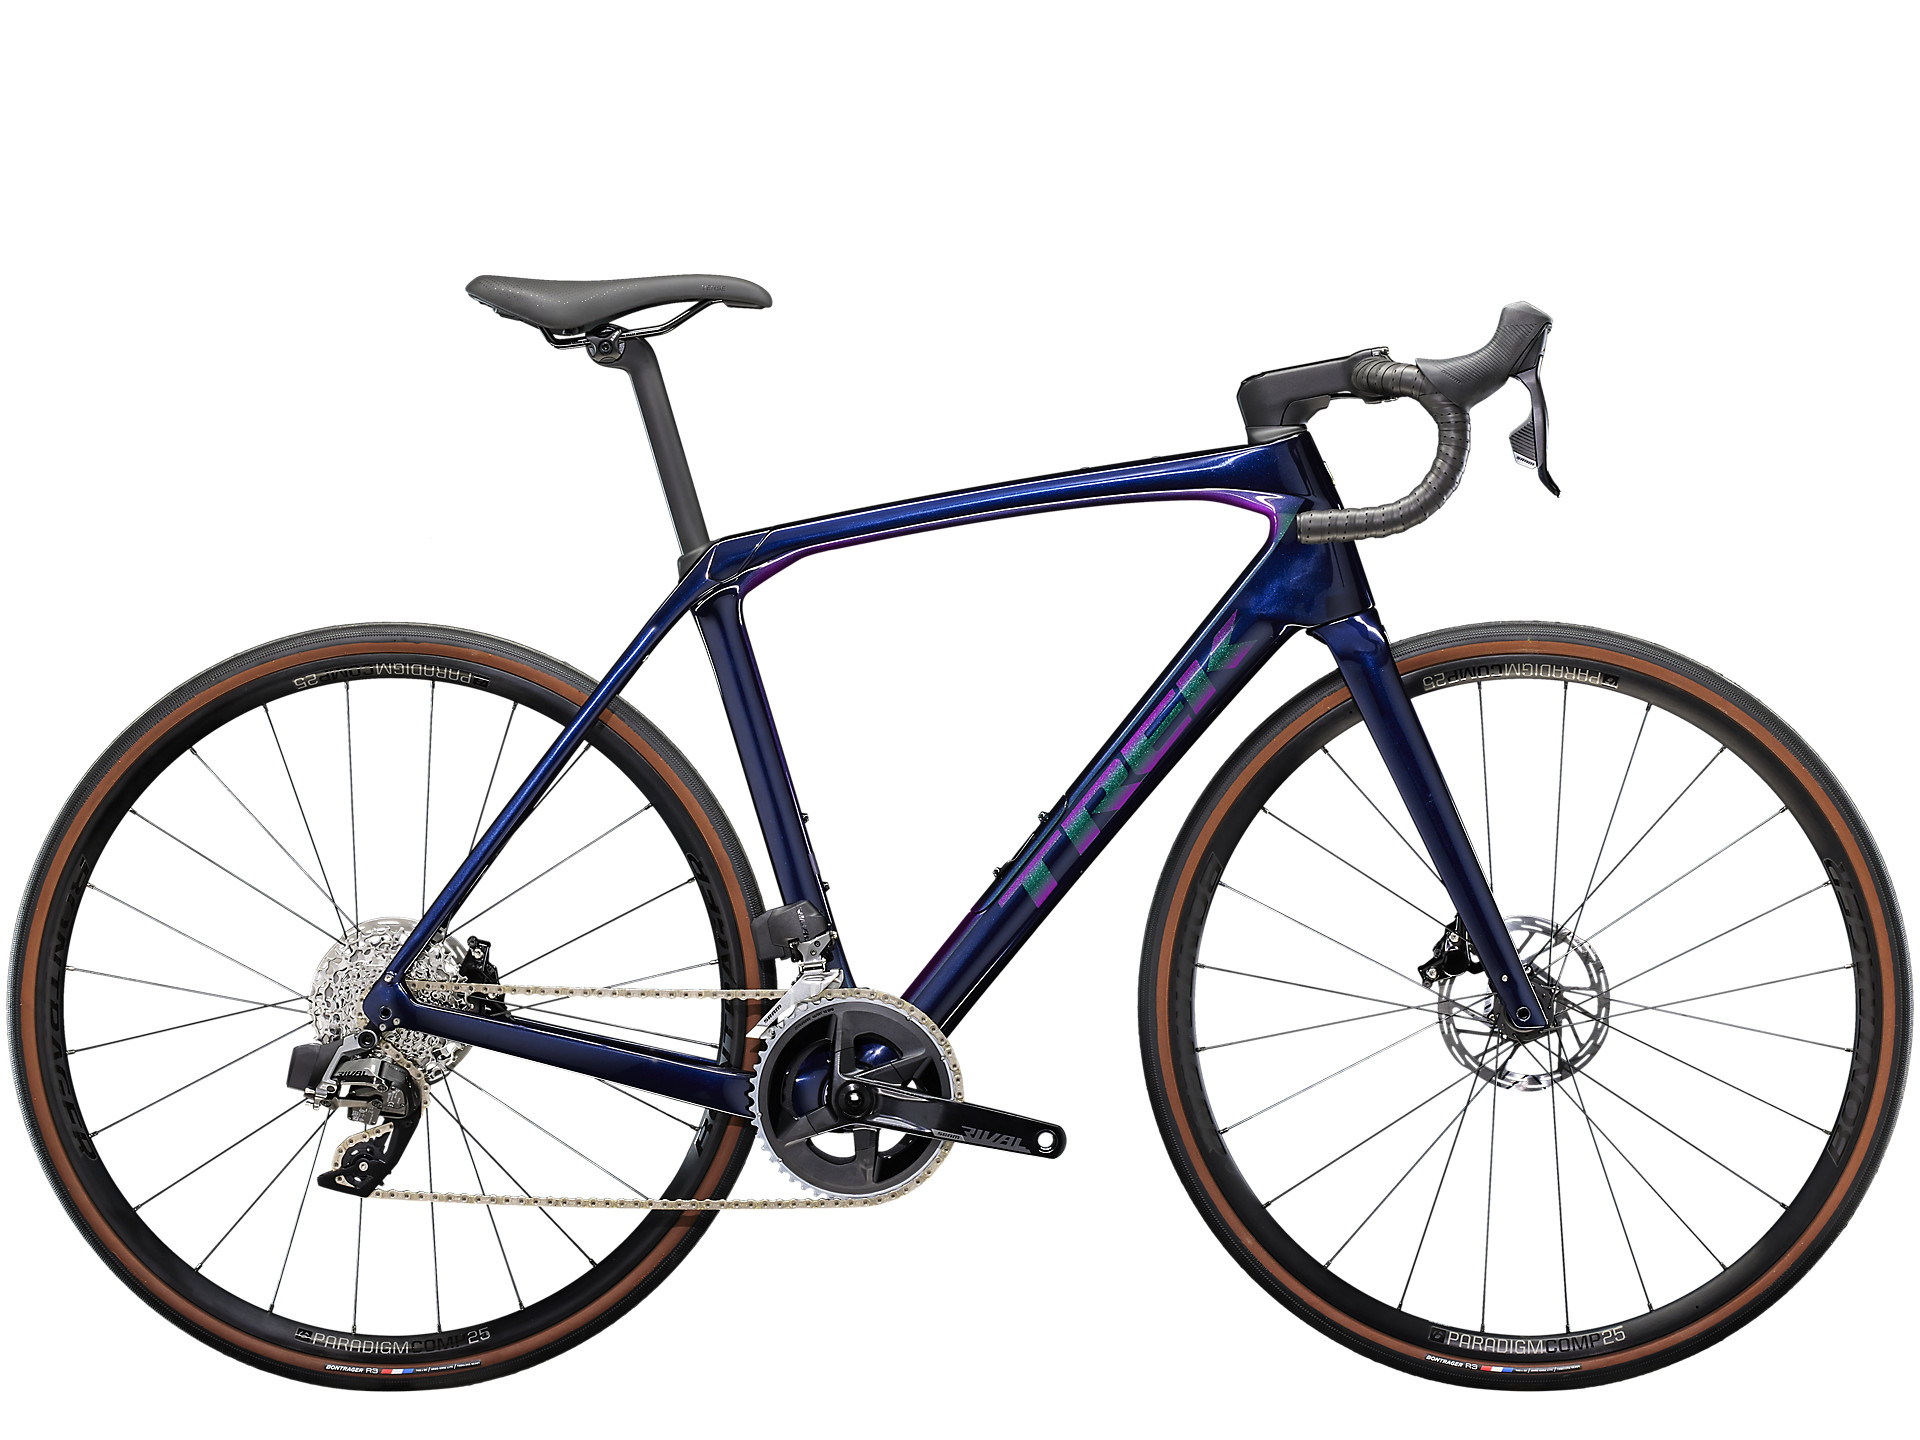 <a href="https://cycles-clement.be/product/domane-sl-6-etap-54-deep-dark-blue/">DOMANE SL 6 ETAP 54 DEEP DARK BLUE</a>